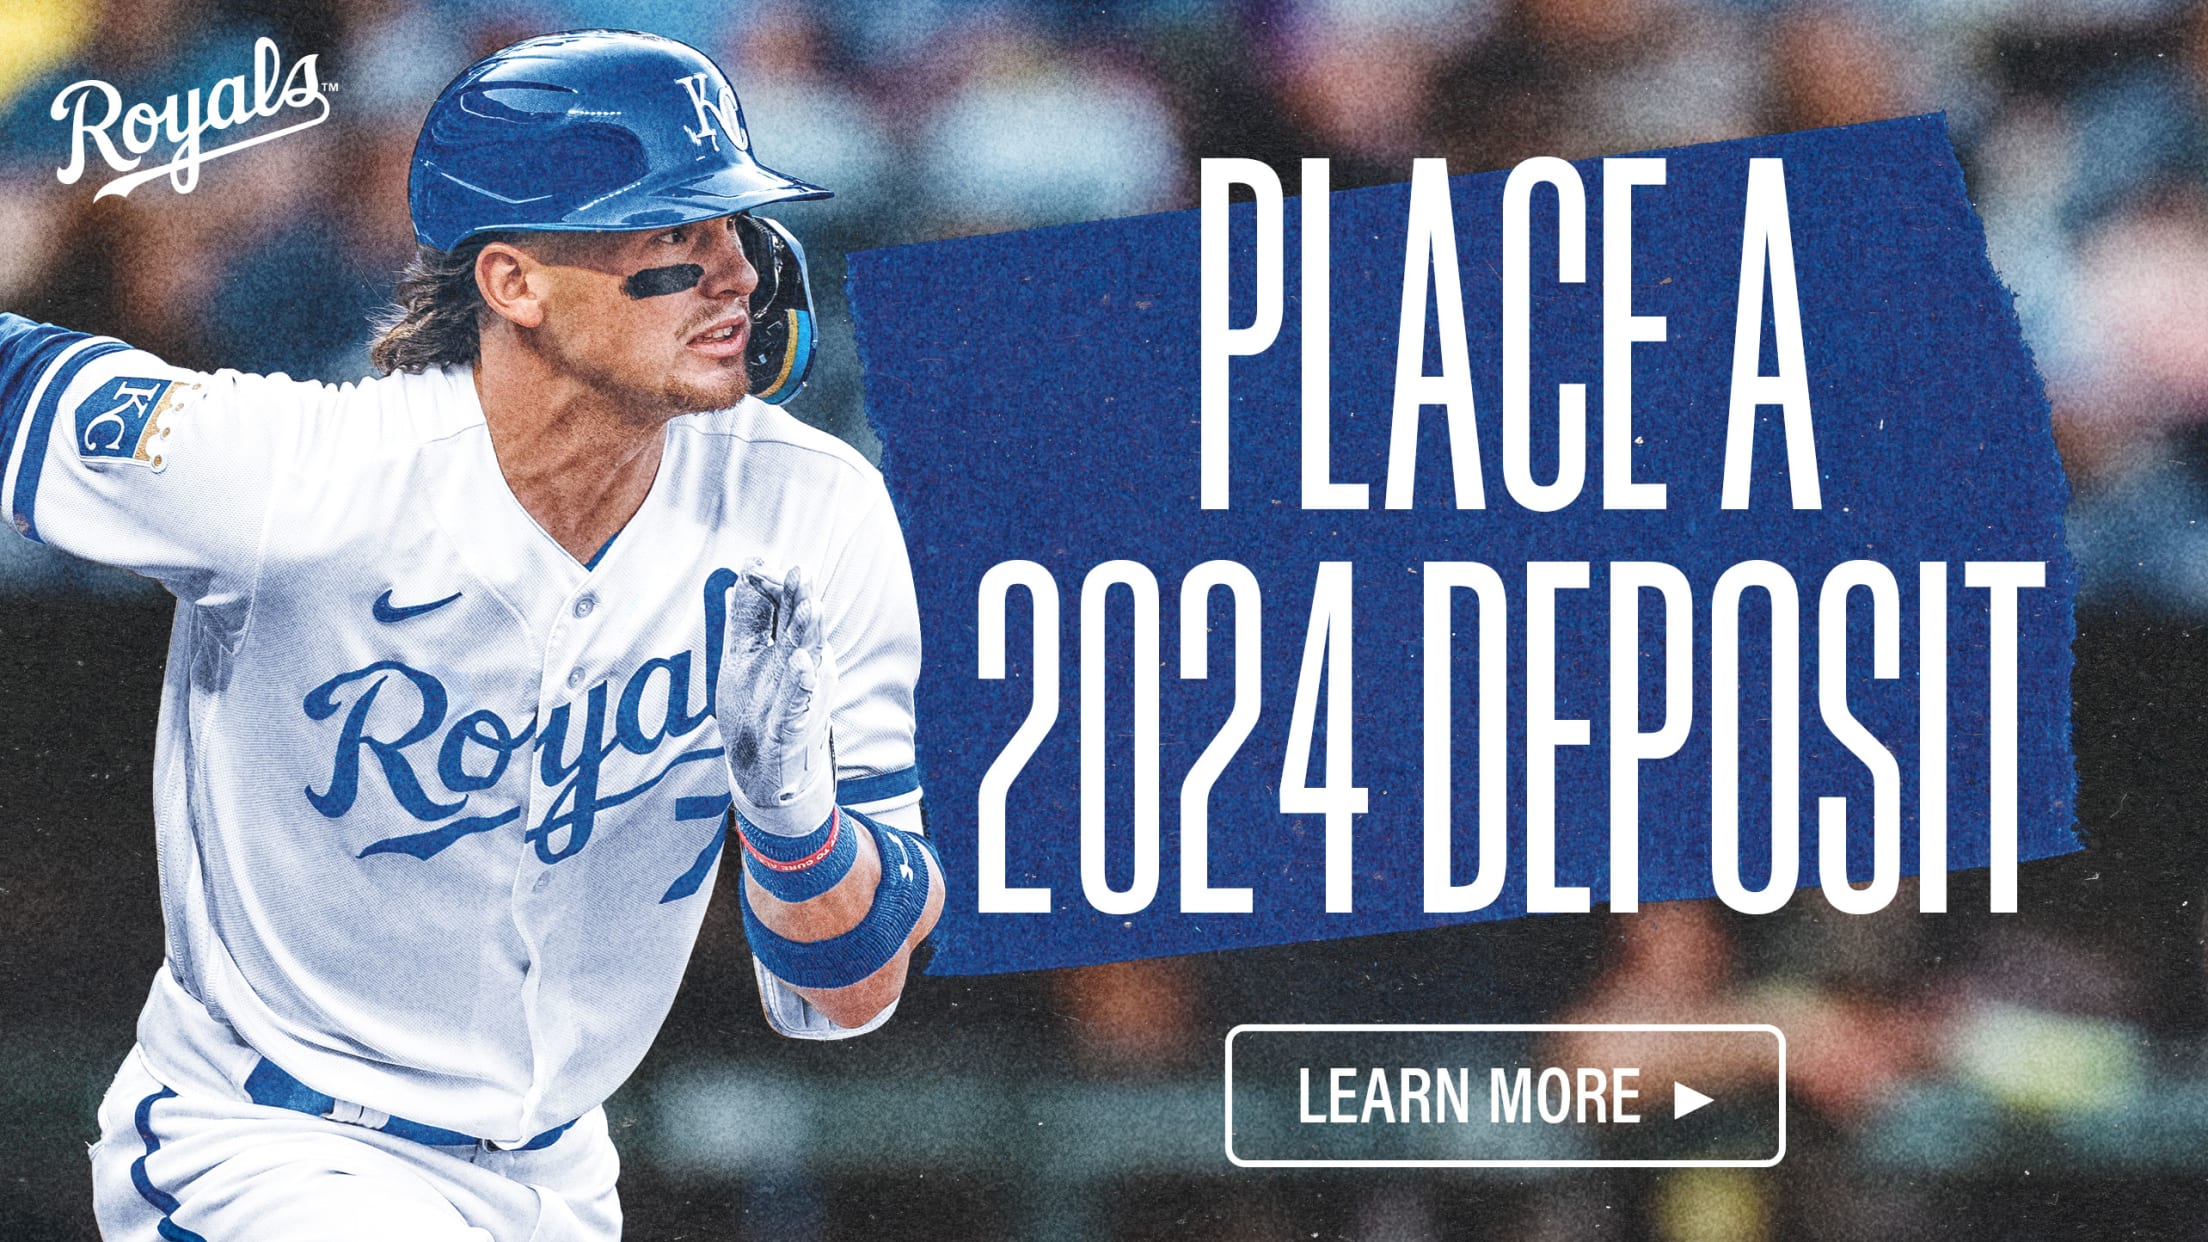 The Official Online Auction Site of the Kansas City Royals